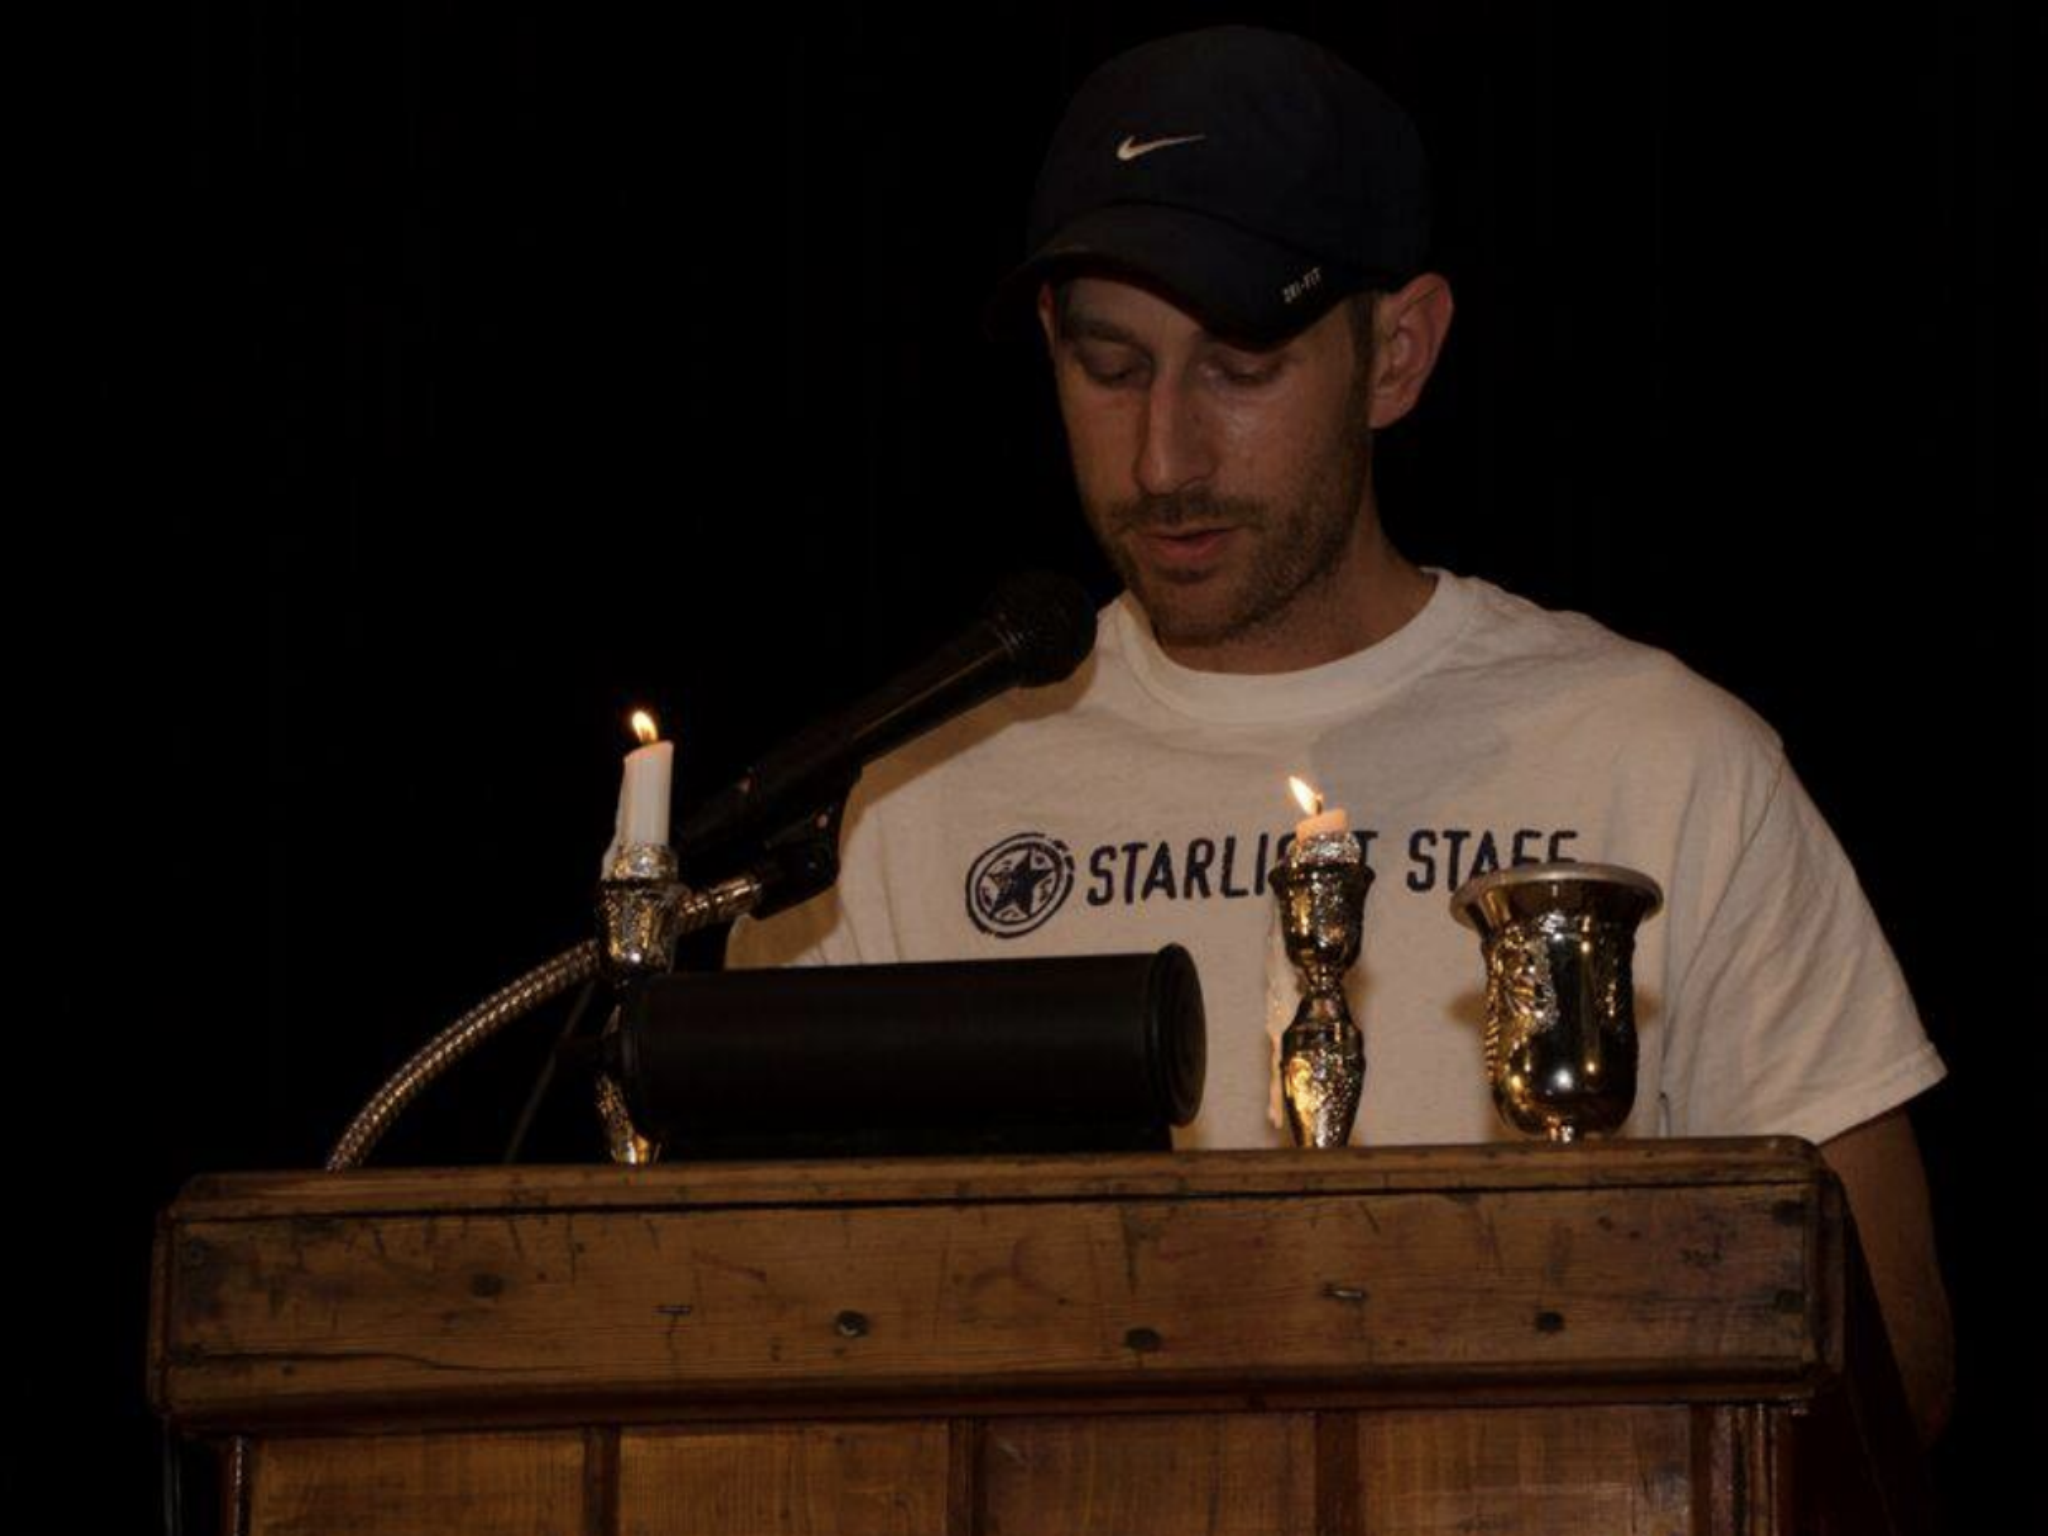 An image of Scott Beigel at Camp Starlight, where he worked as a counselor